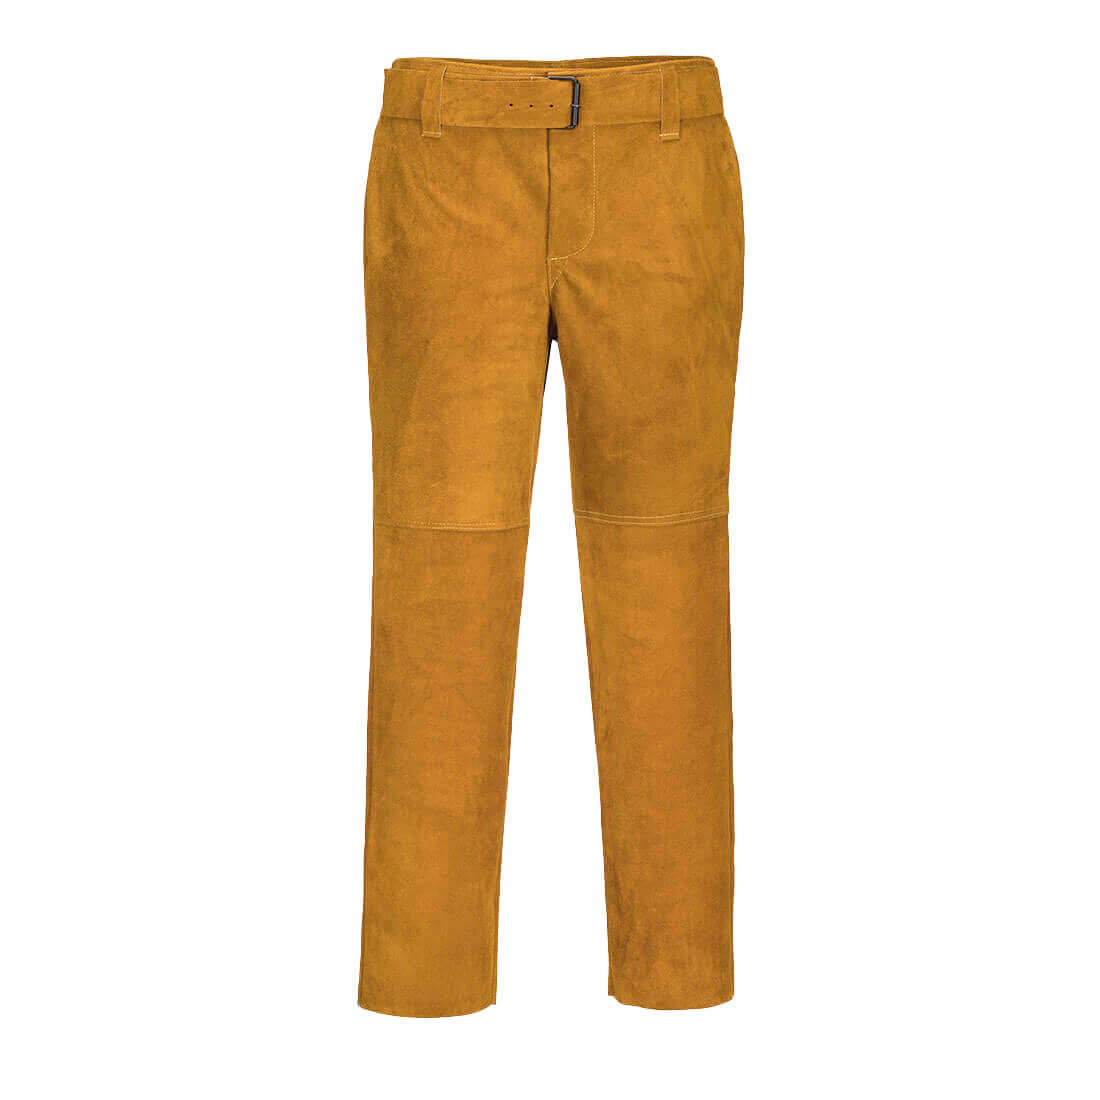 Portwest Leather Welding Trouser